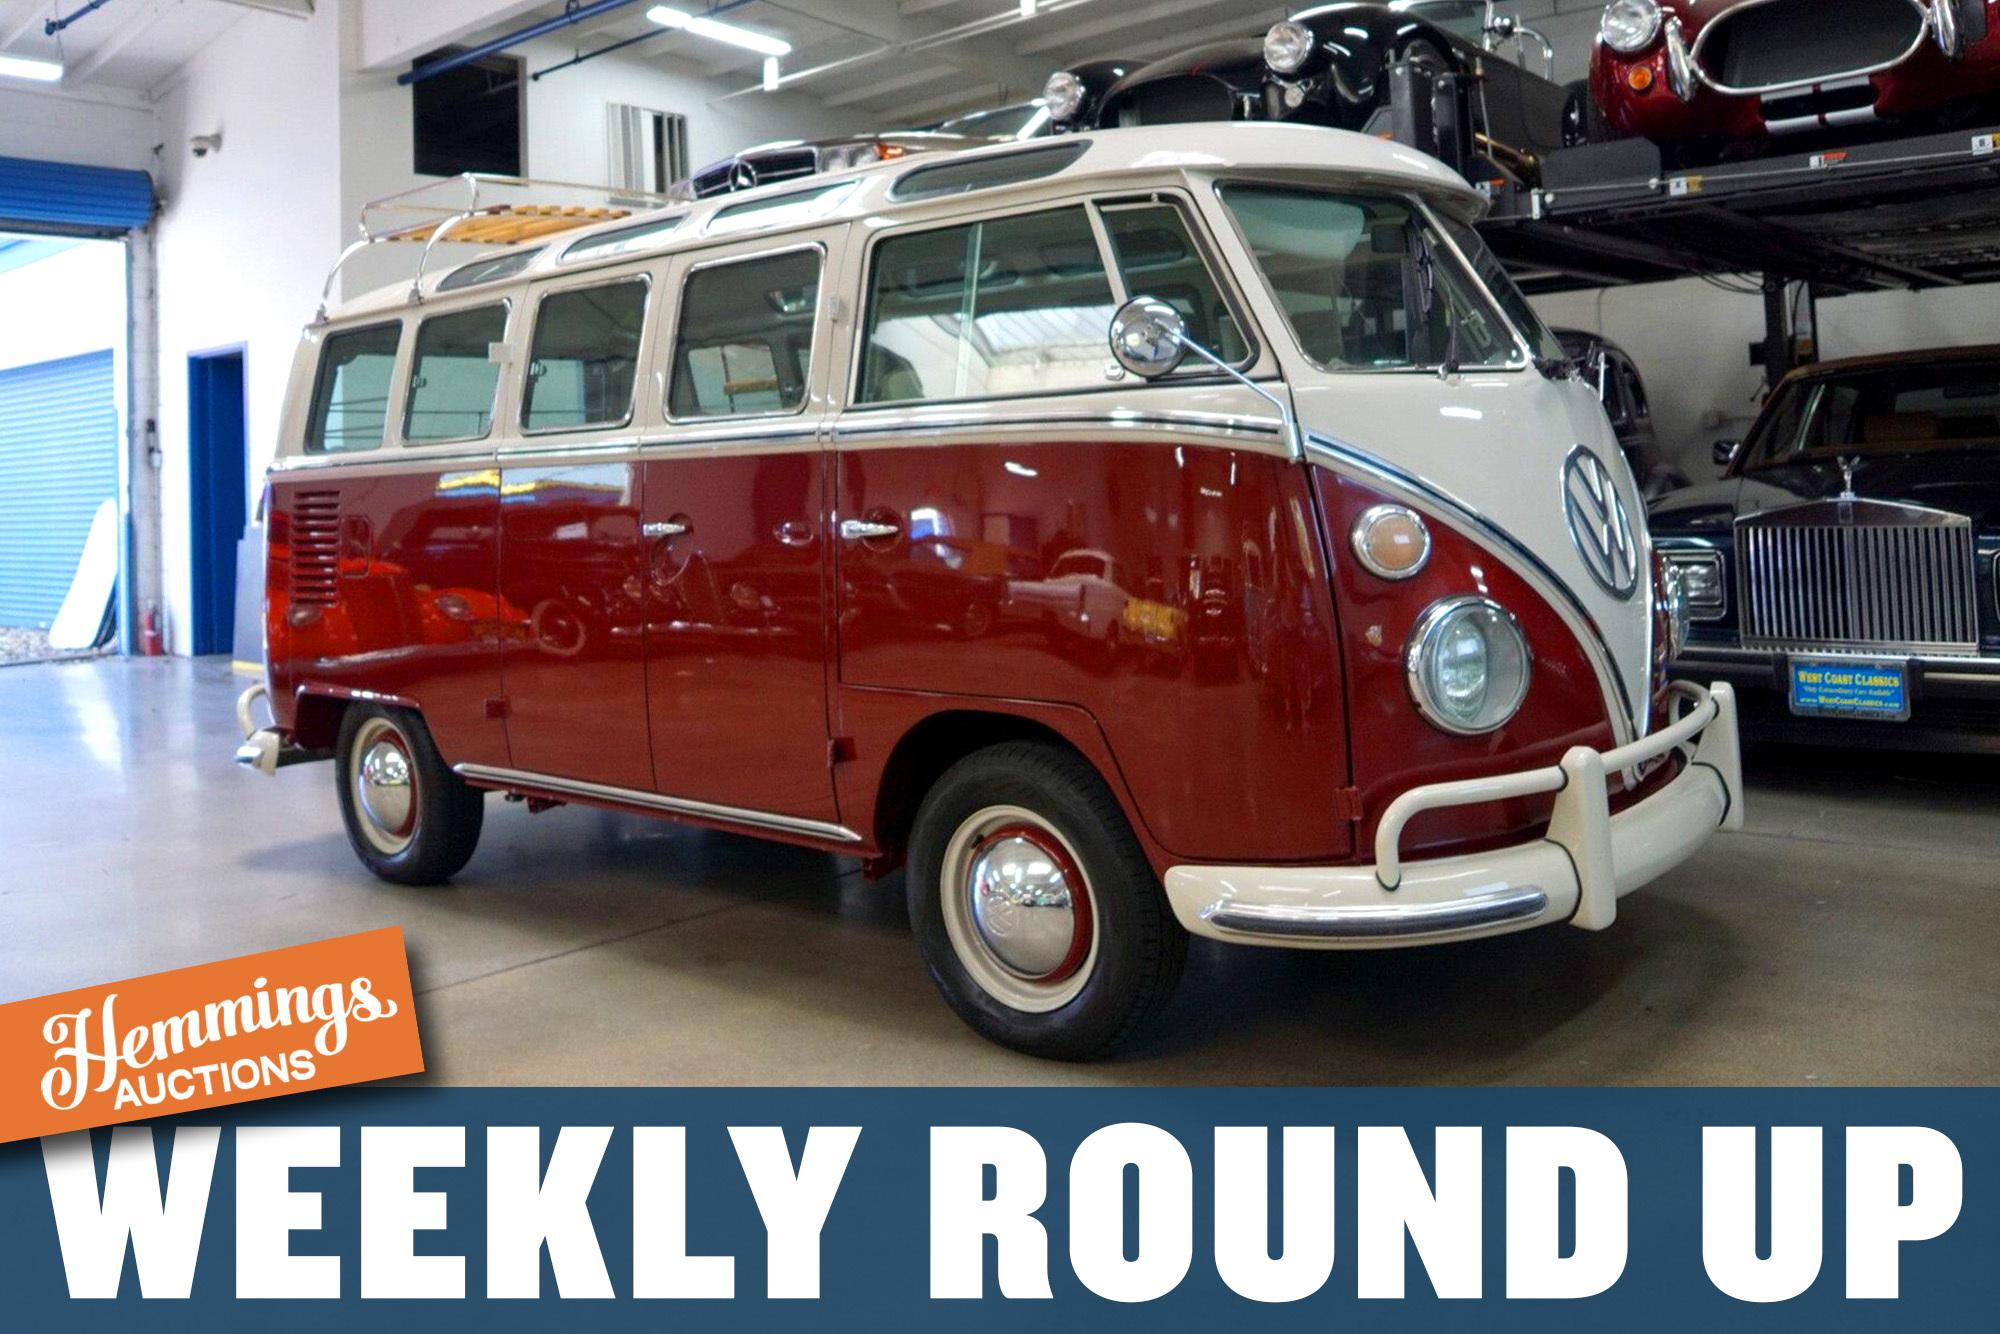 Hemmings Auctions Weekly Round Up January 8-14, 2023: Samba-style 1975 Volkswagen Microbus, 1957 Cadillac Series 62 Convertible, and 1972 Buick GS 455 Stage 1 Convertible